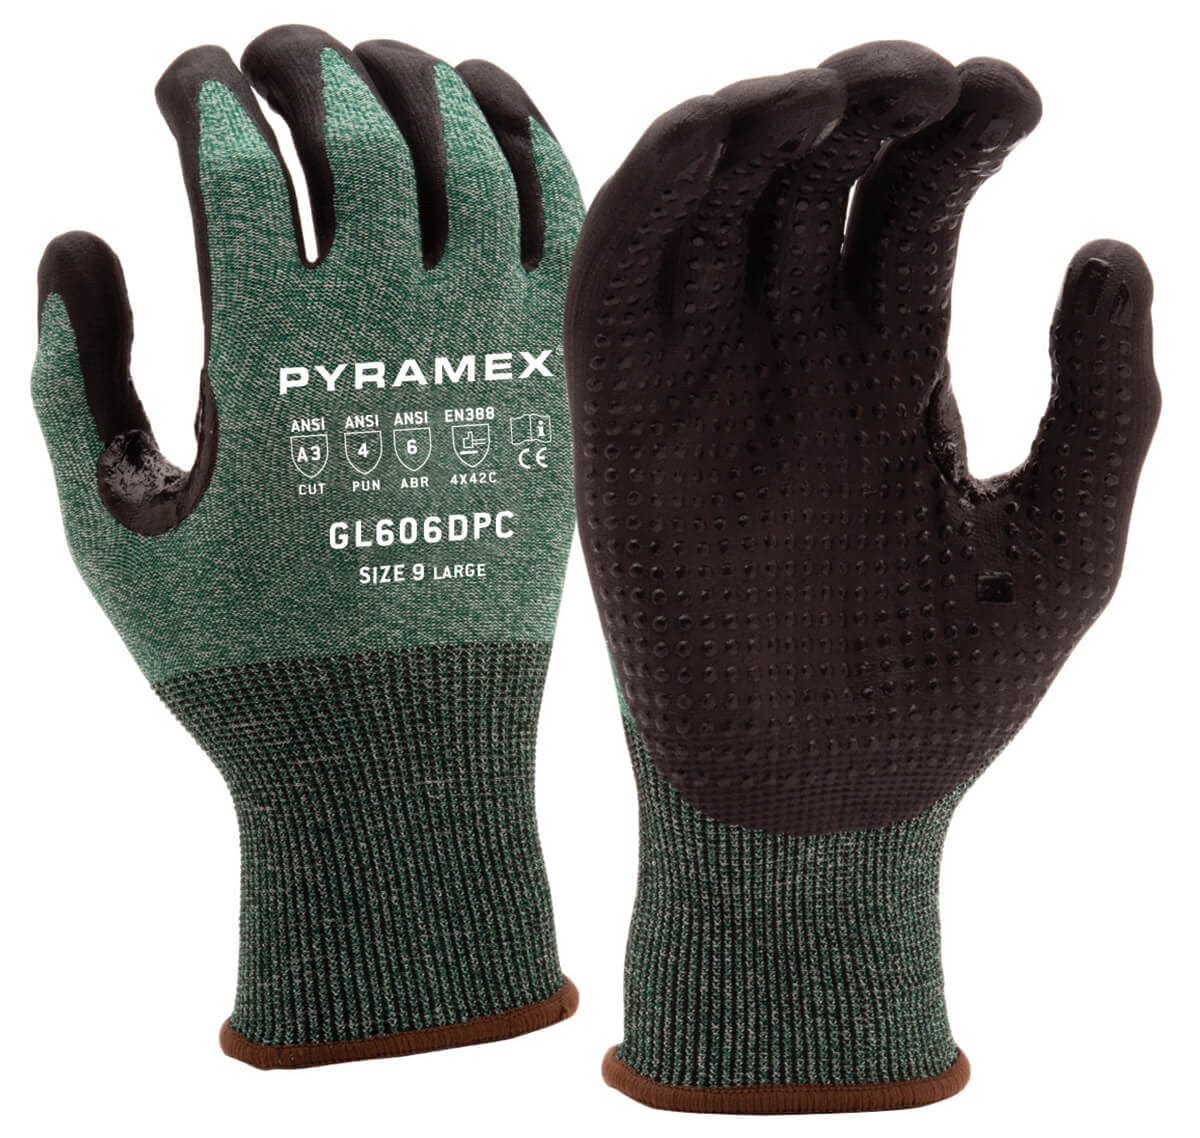 Pyramex GL606DPC Micro-Foam Nitrile Gloves with Dotted Palms Large